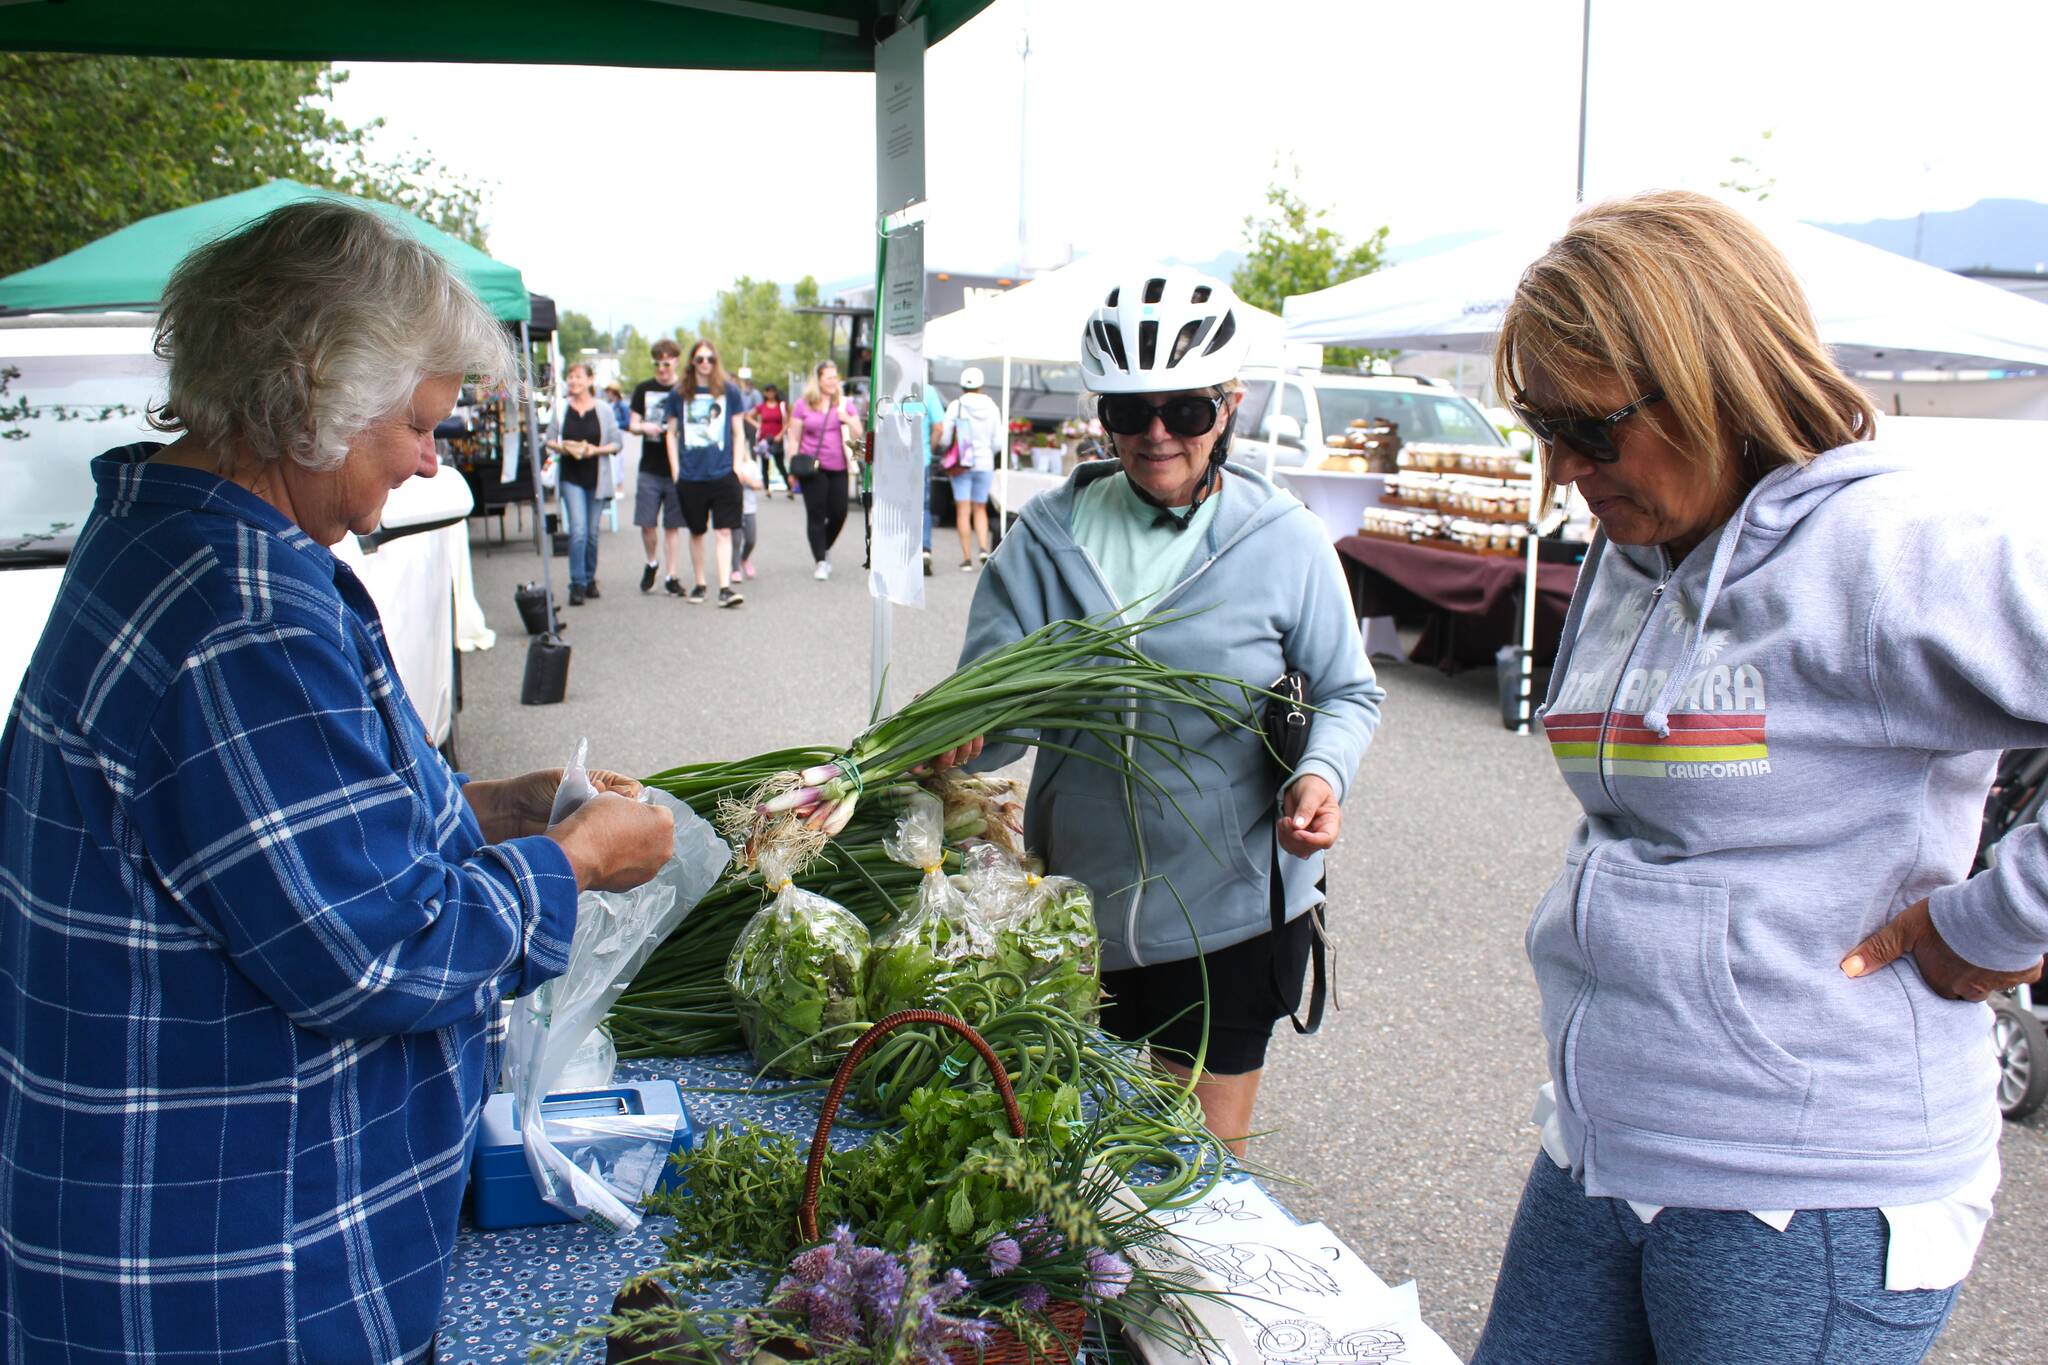 The Enumclaw Plateau Farmers’ Market saw record gross income and customer numbers this year. Photo by Ray Miller-Still